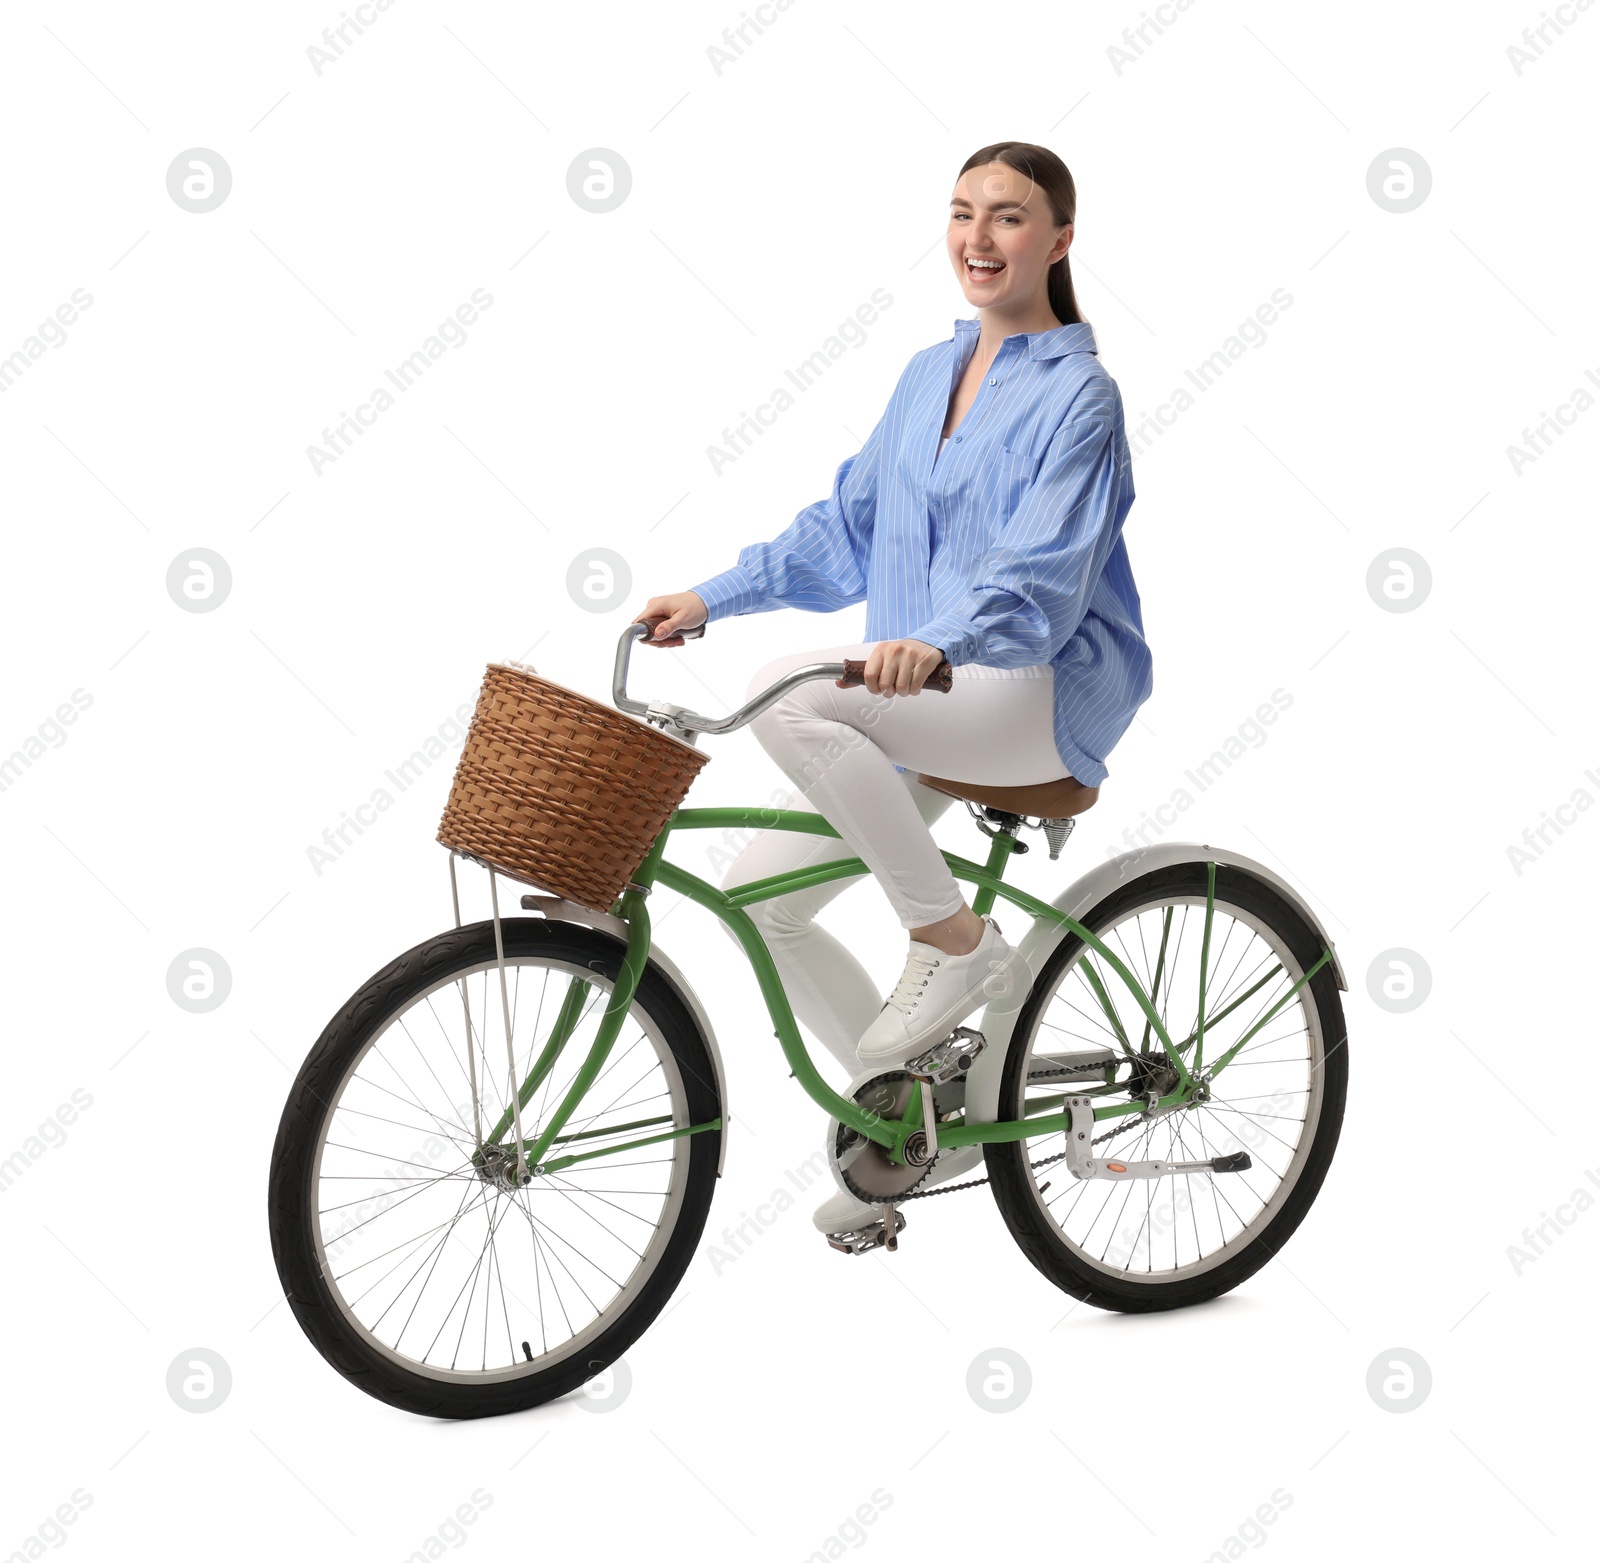 Photo of Smiling woman riding bicycle with basket isolated on white